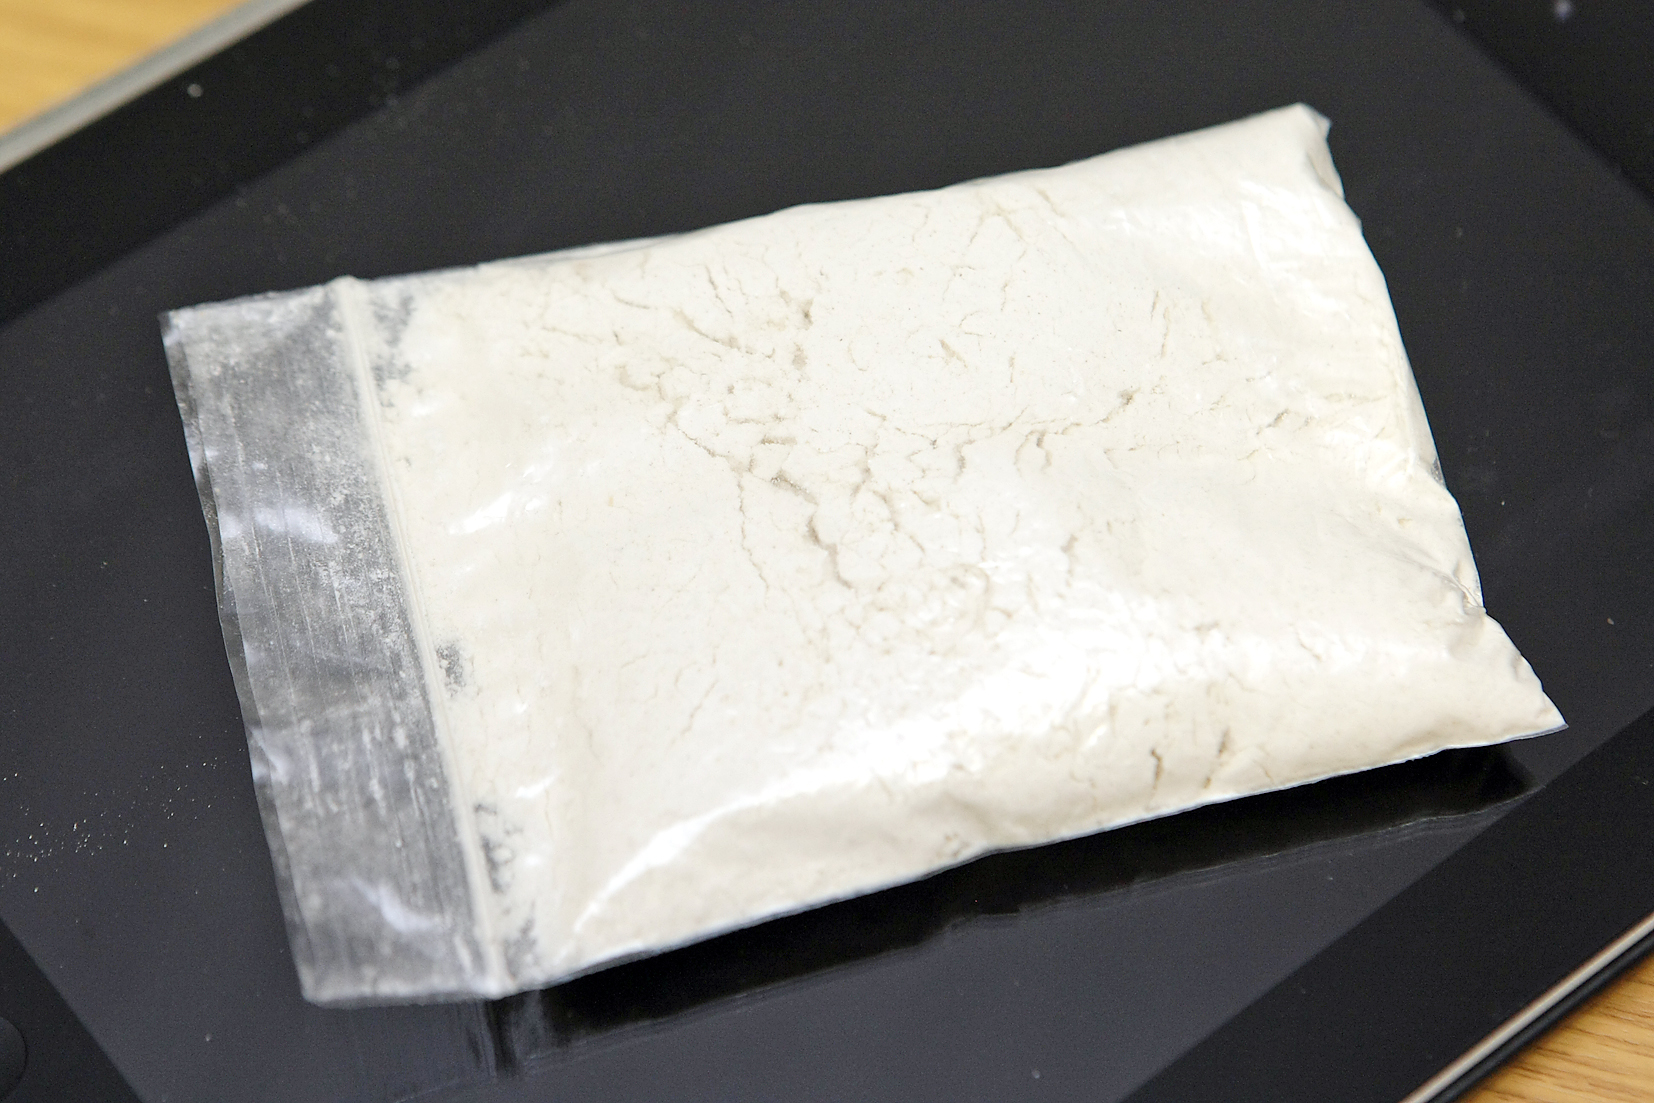 Two kilos of the Class A drug were found when police stopped a vehicle on the A1 near Lisburn (Daily Belfast library pic)